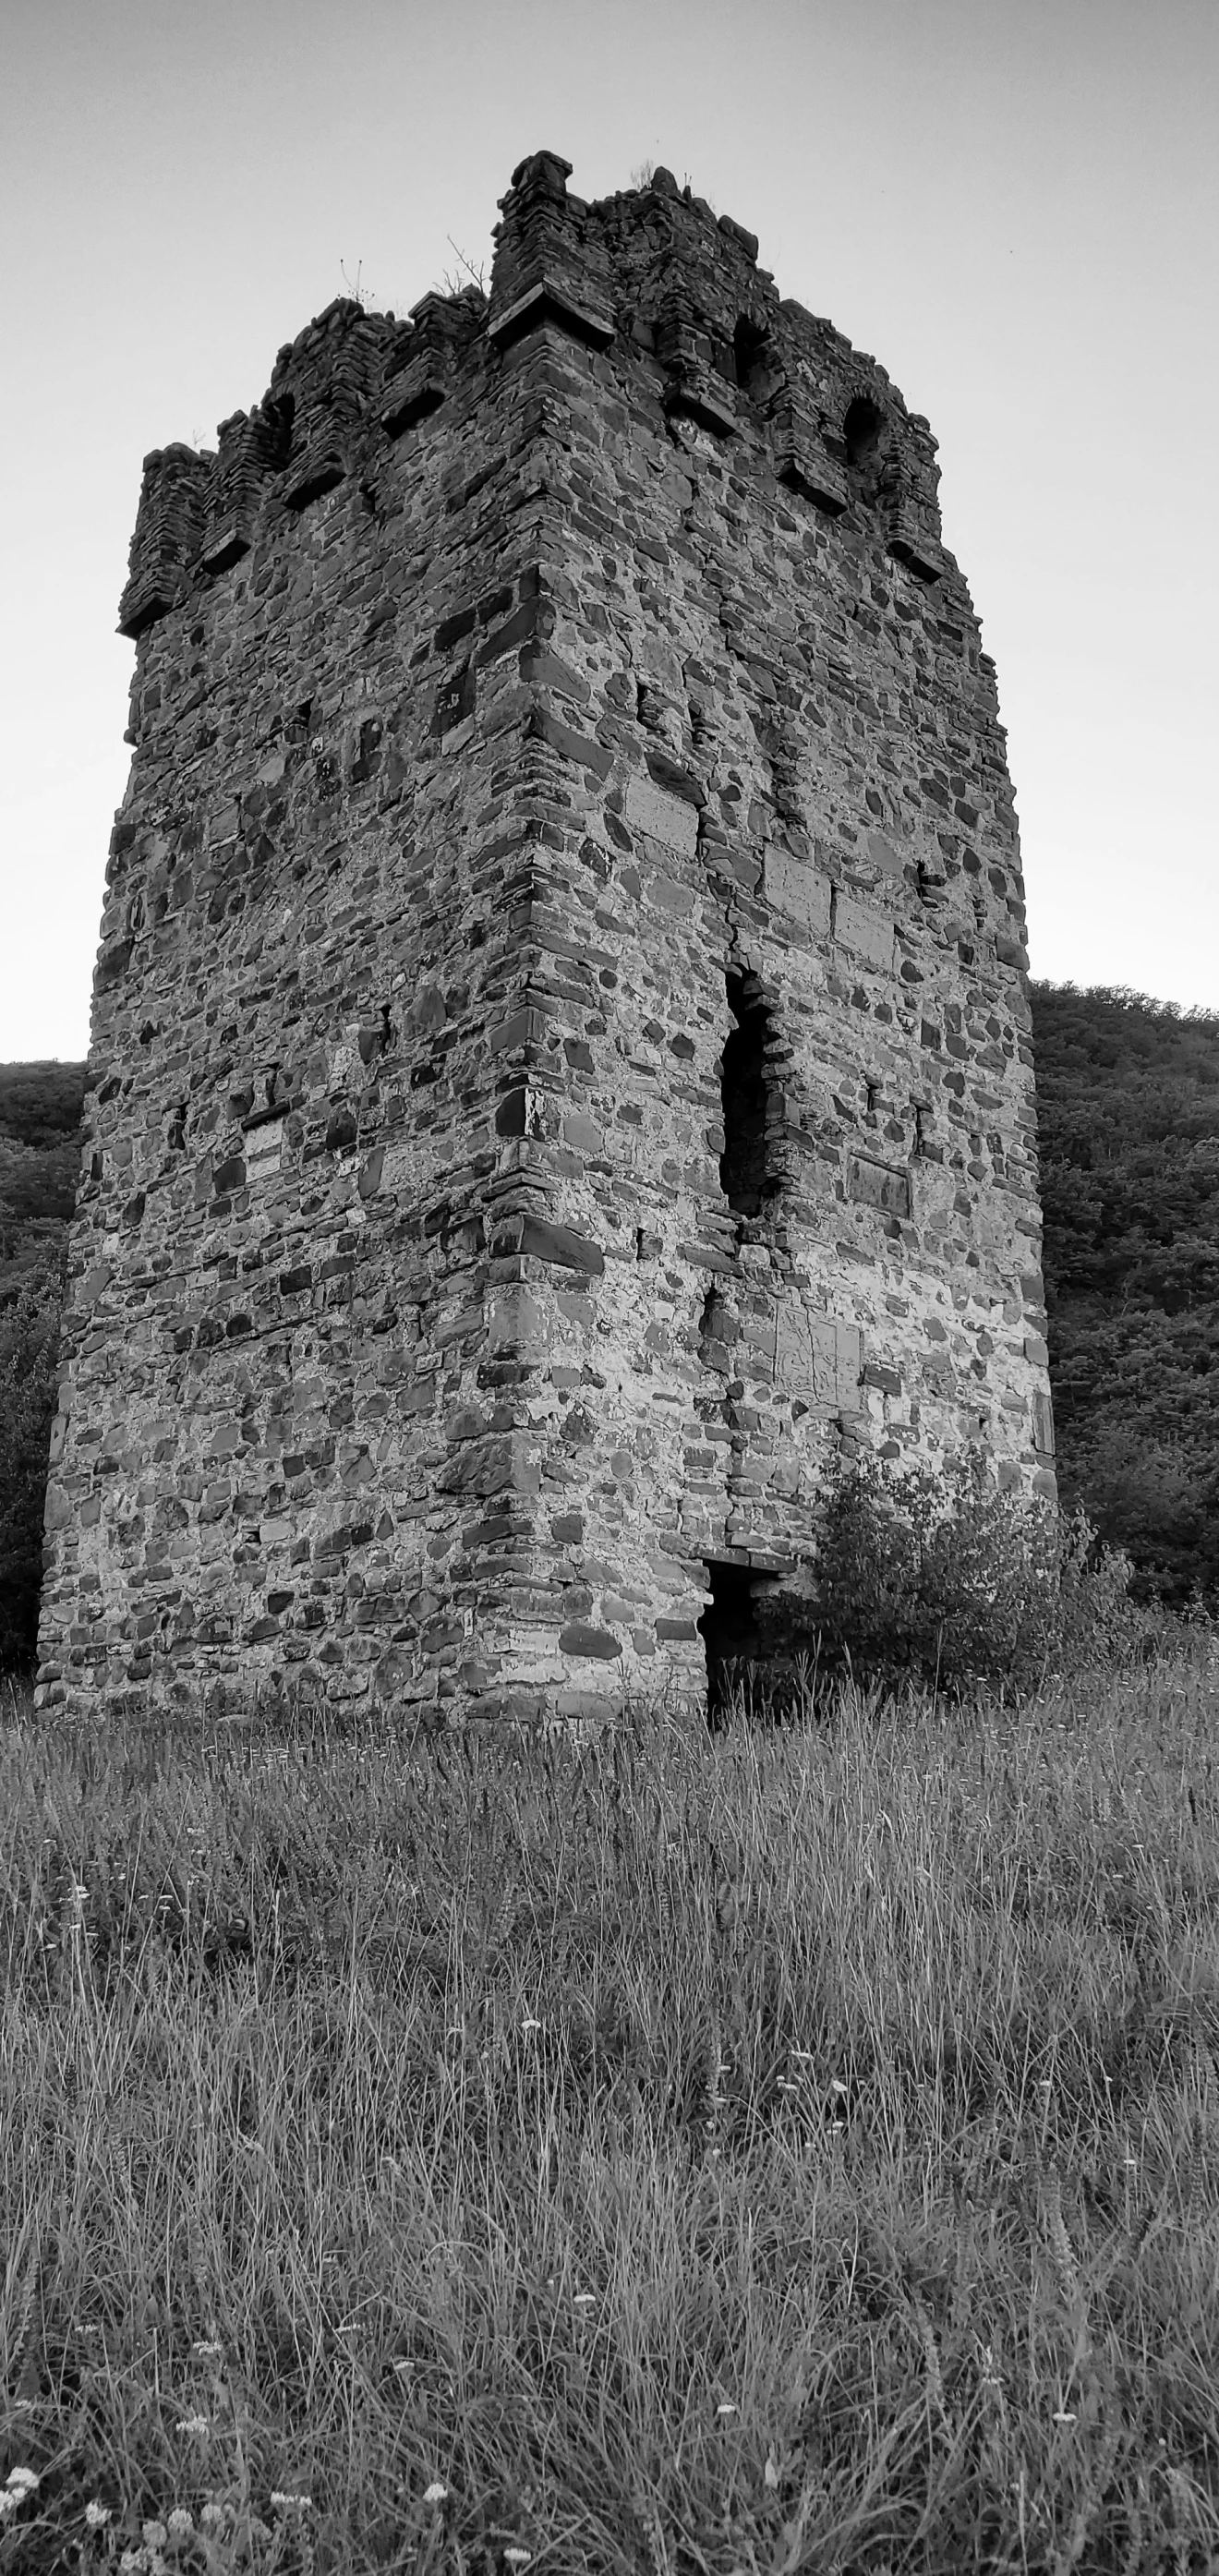 a black and white po of a tall, stone building in the grass